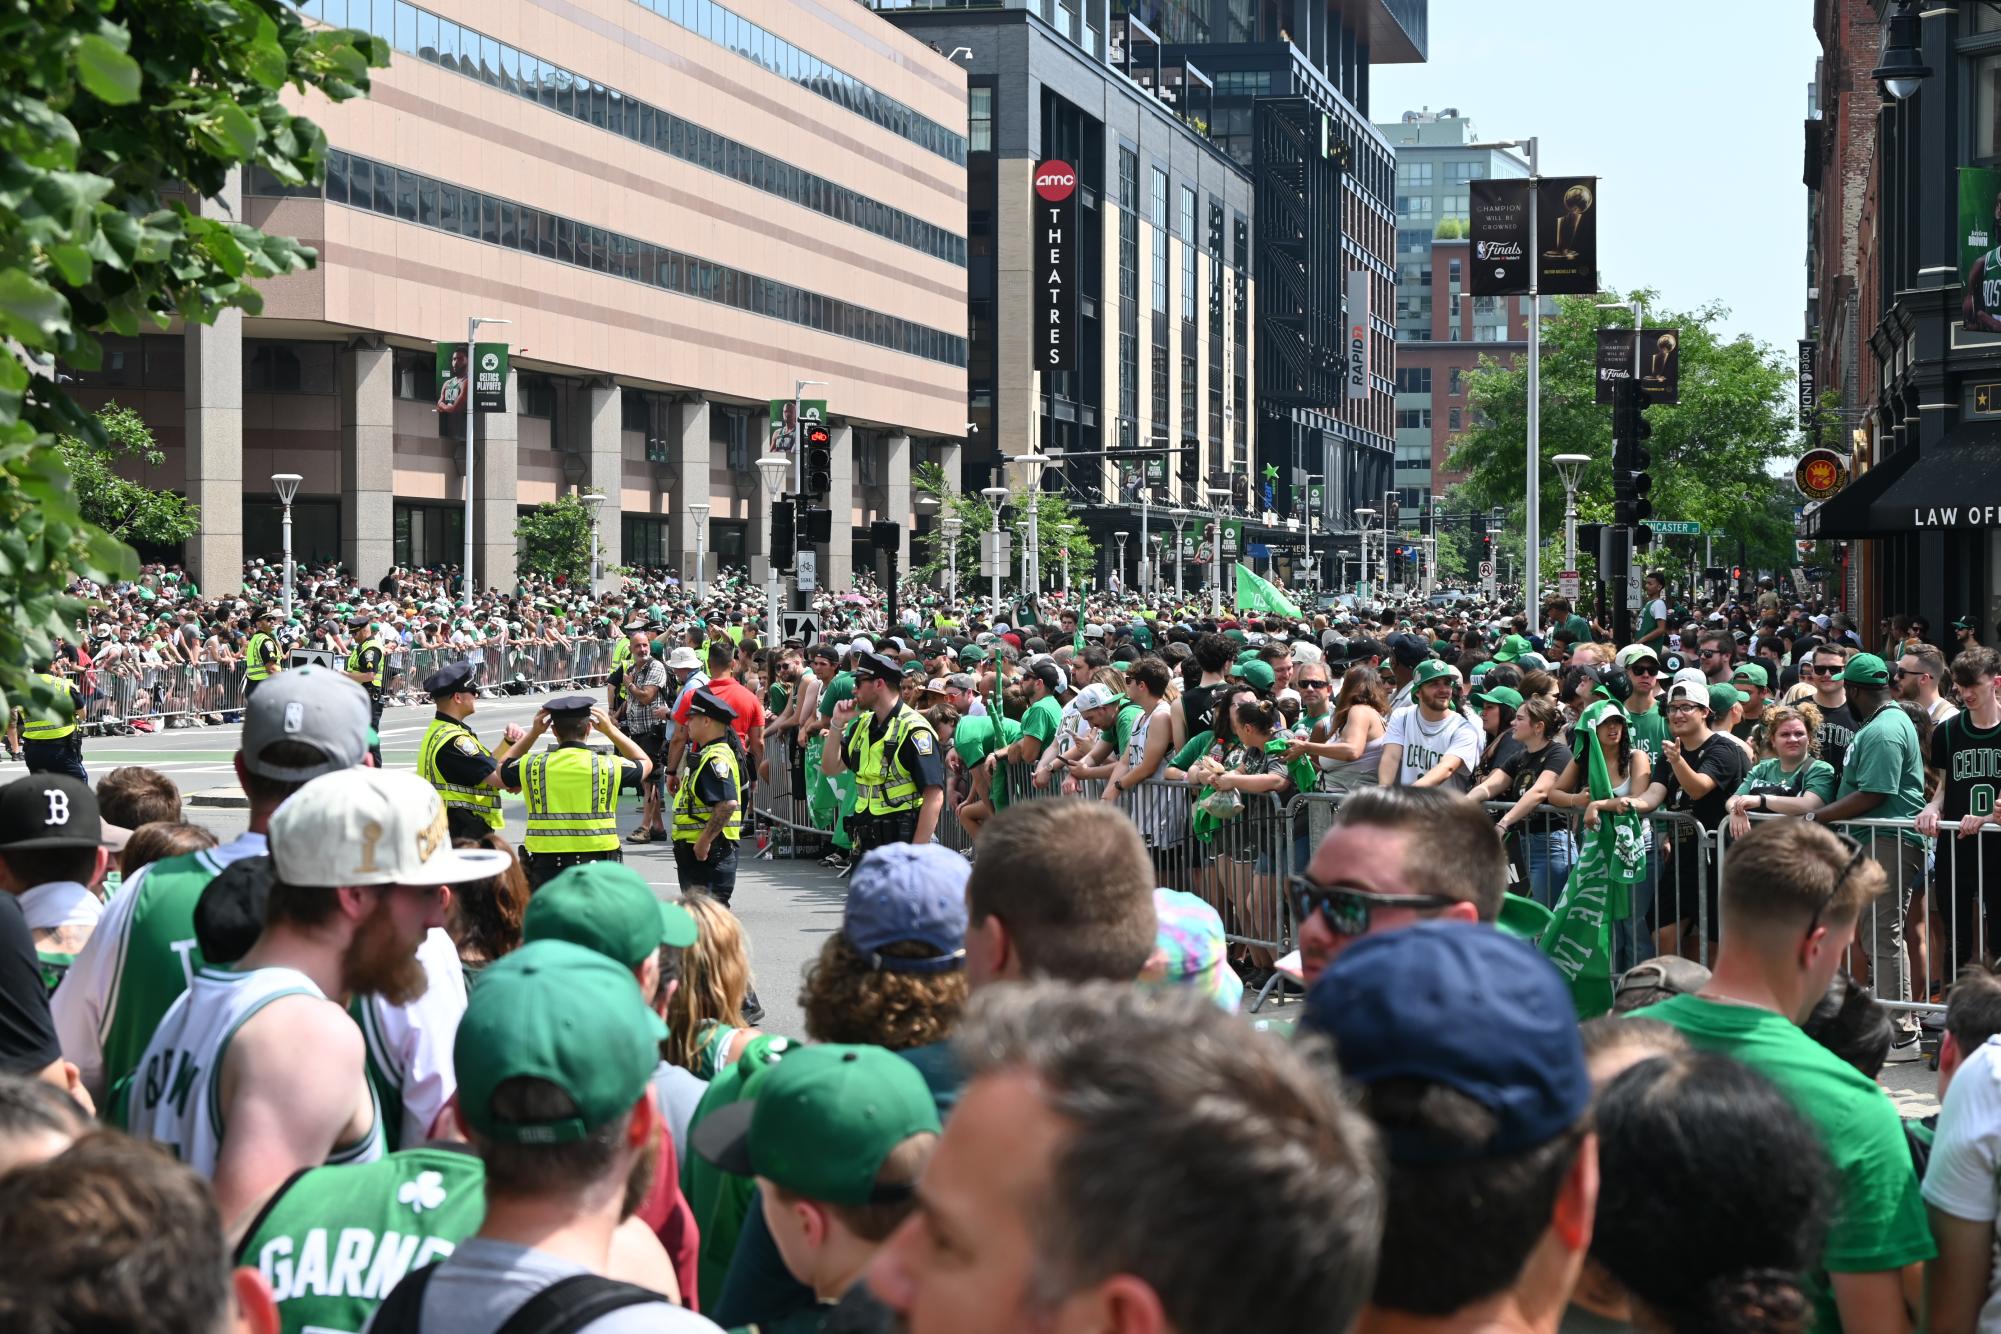 The+Celtics+parade+brought+all+walks+of+life+together+throughout+the+city+of+Boston%2C+with+fans+littering+the+streets+in+green+clothing%2C+confetti%2C+and+signs.+%0D%0A